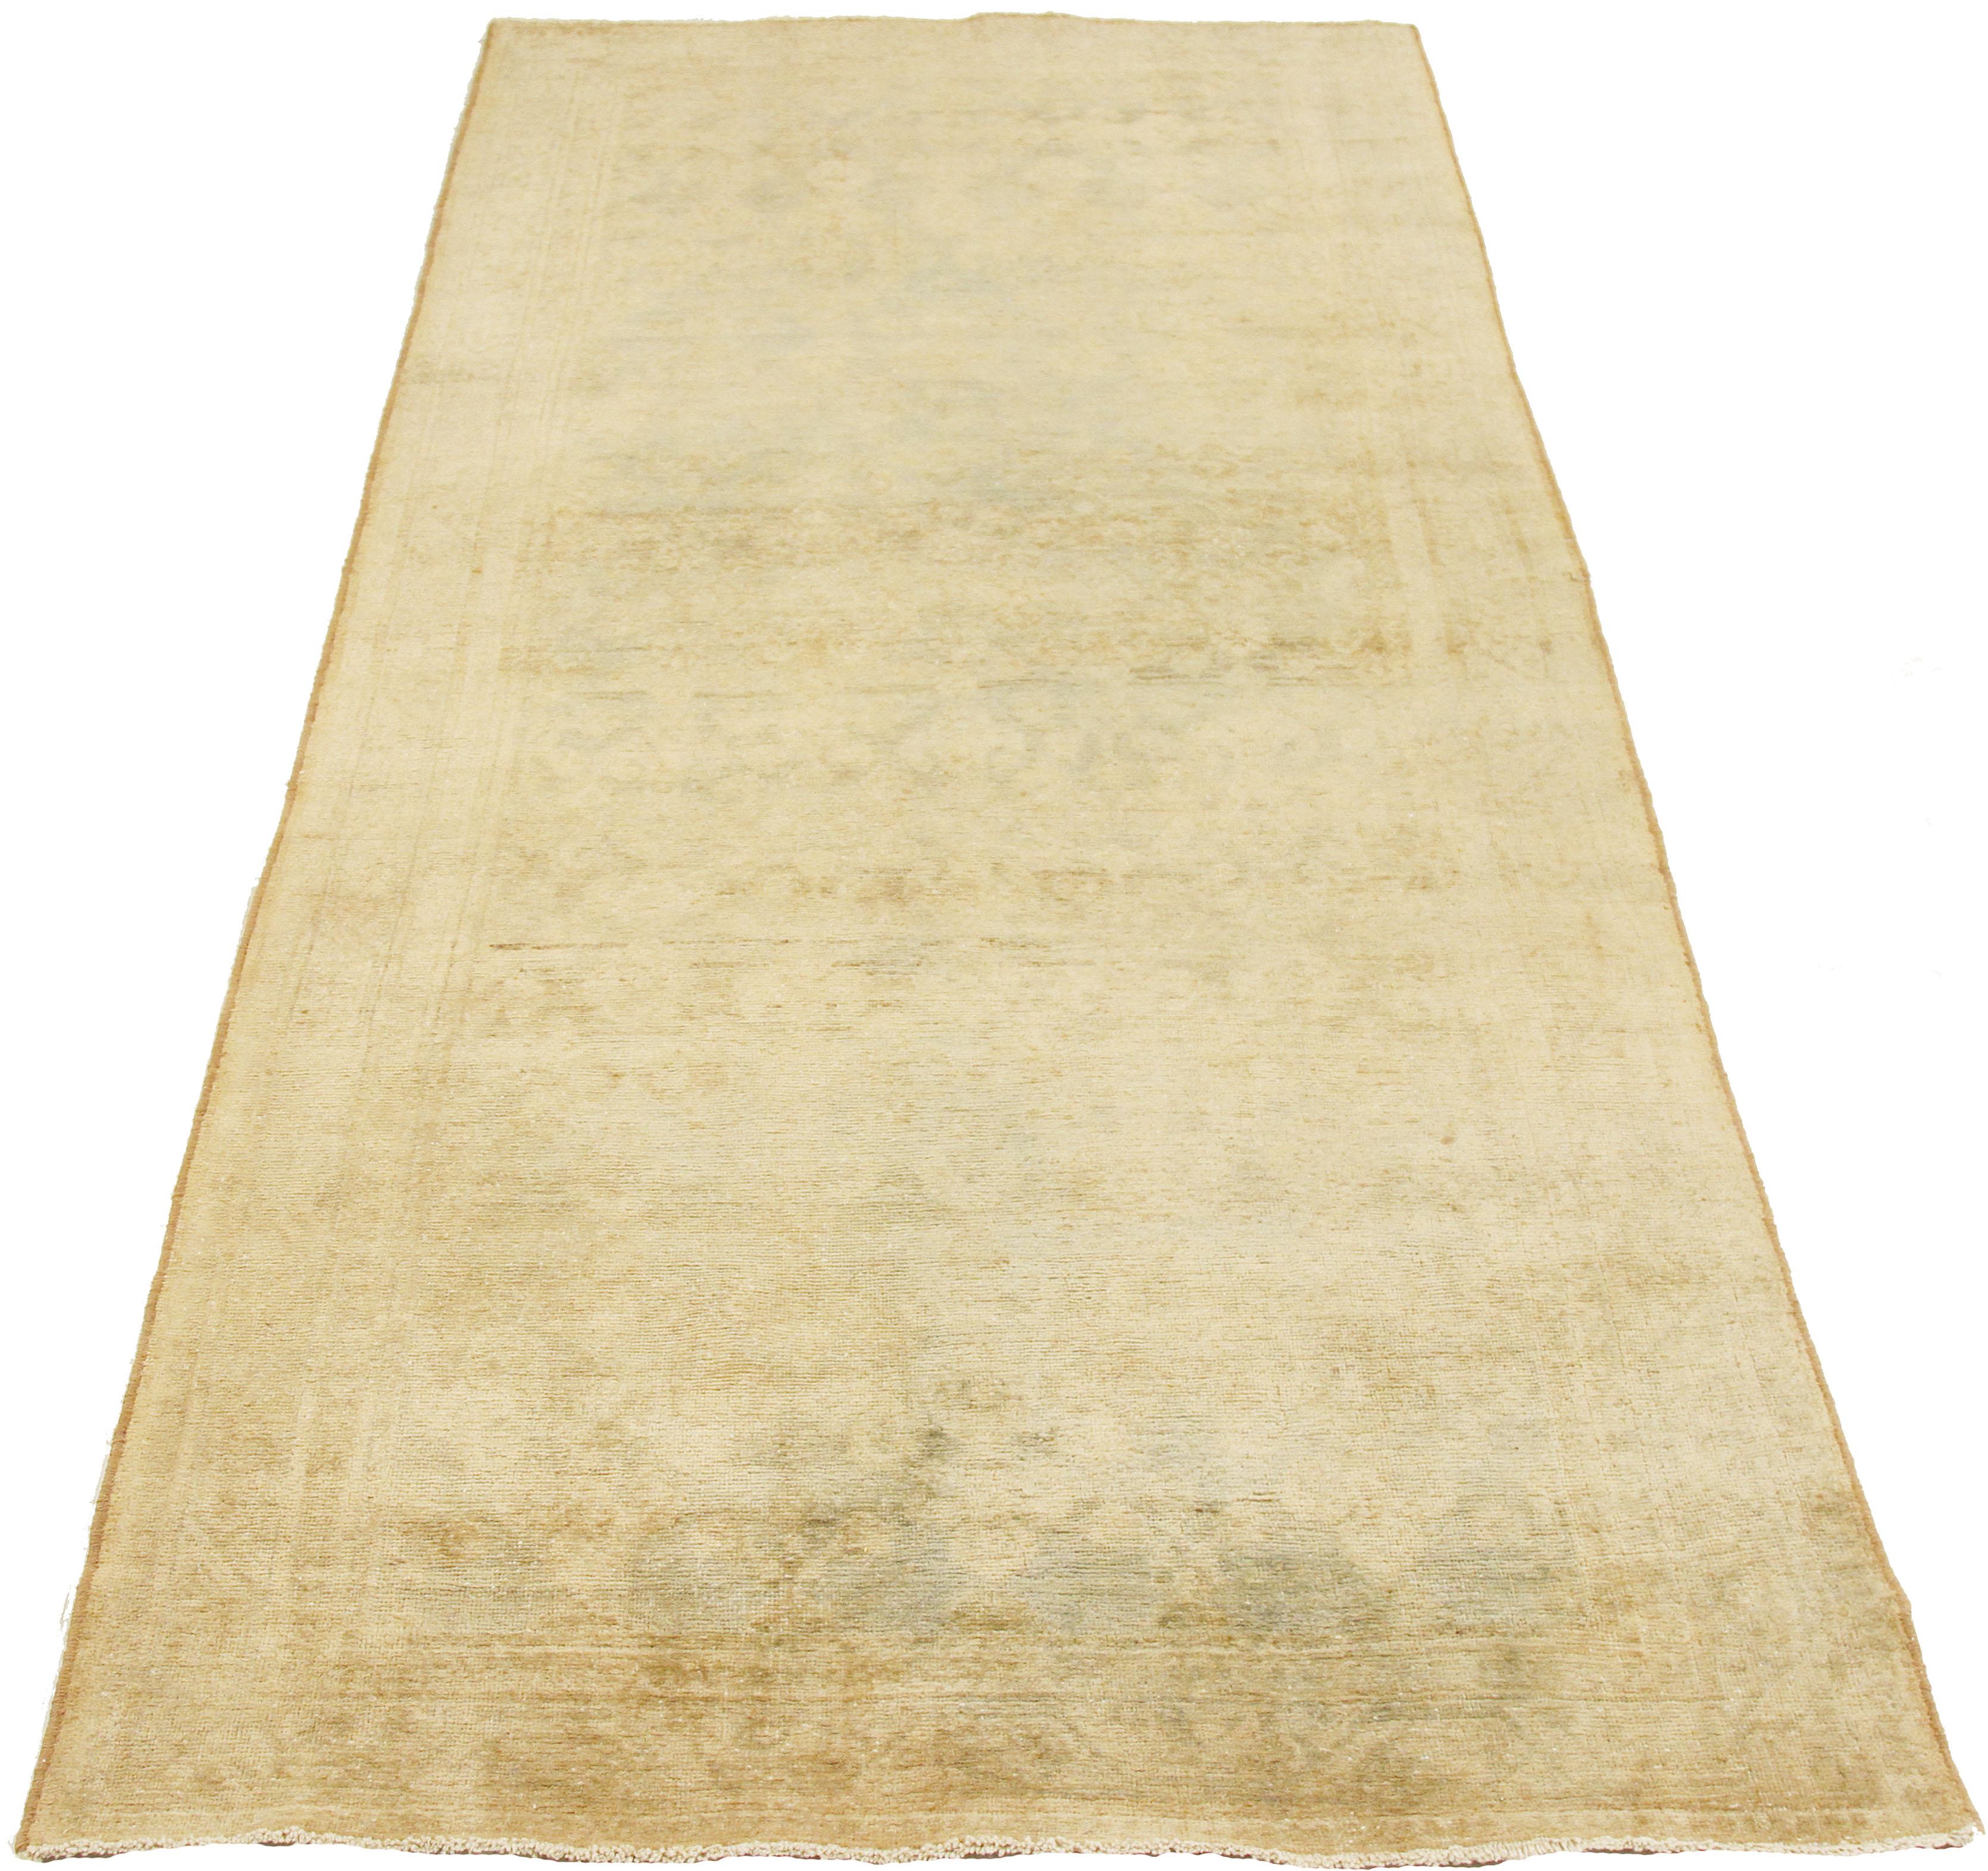 Antique Persian runner rug handwoven from the finest sheep’s wool and colored with all-natural vegetable dyes that are safe for humans and pets. It’s a traditional Malayer design featuring faded beige and green floral details over an ivory field.